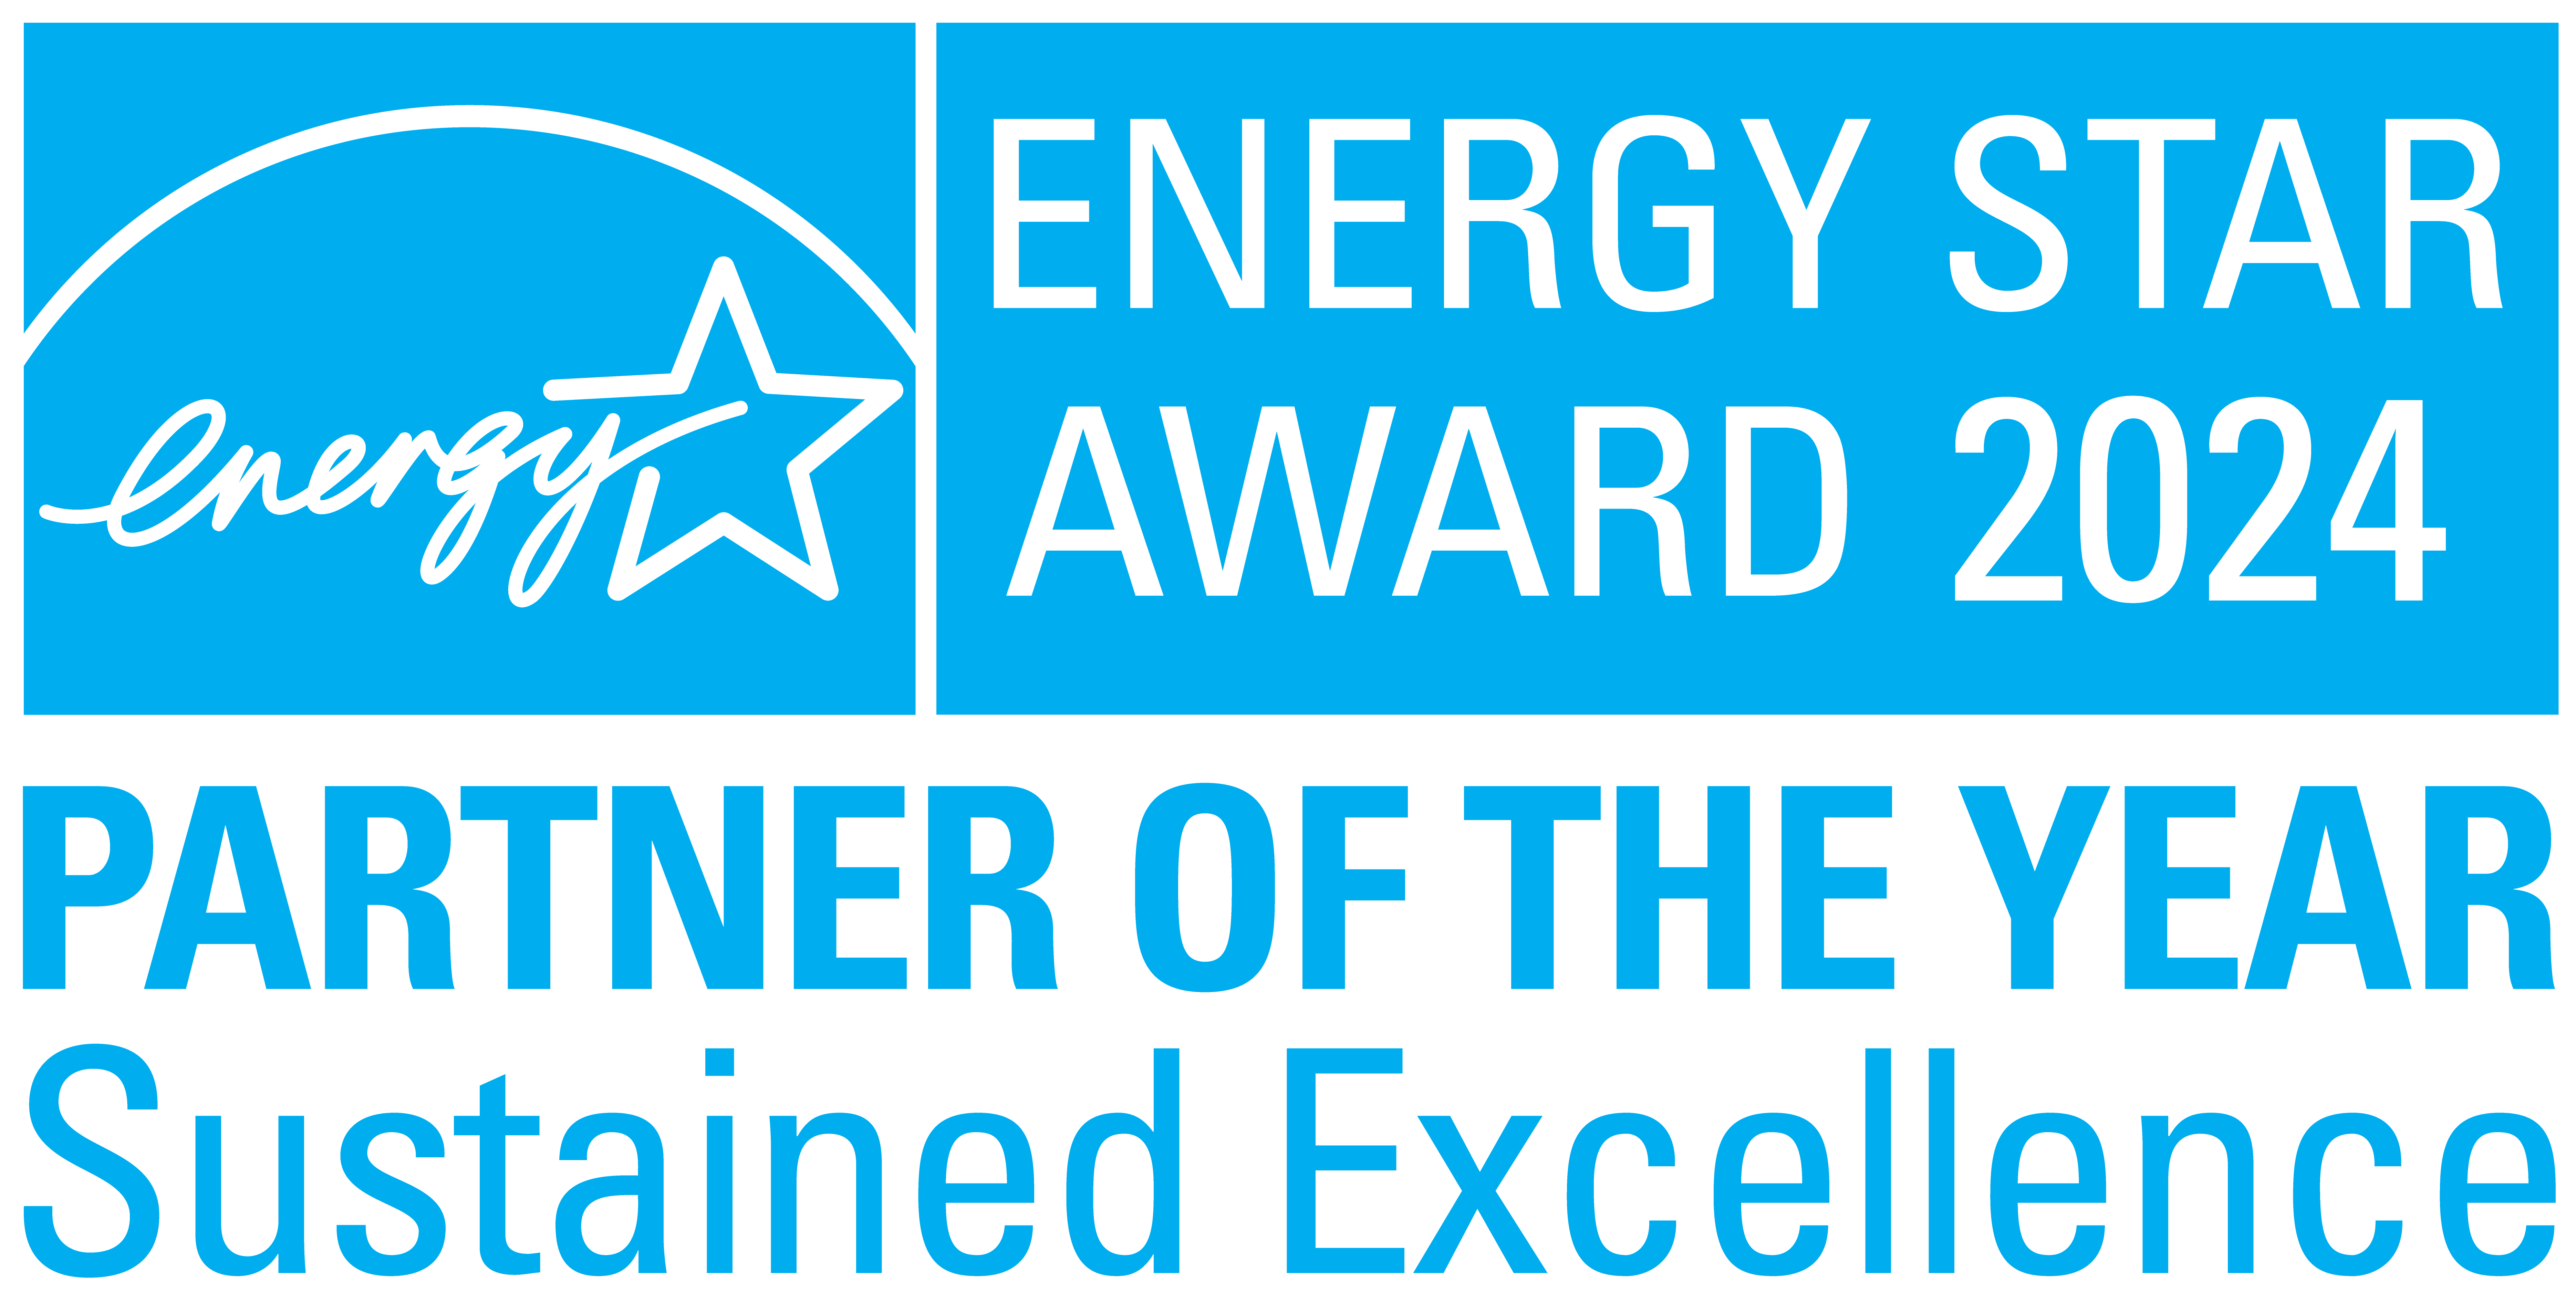 Energy Star Award 2022 Partner of the Year Sustained Excellence